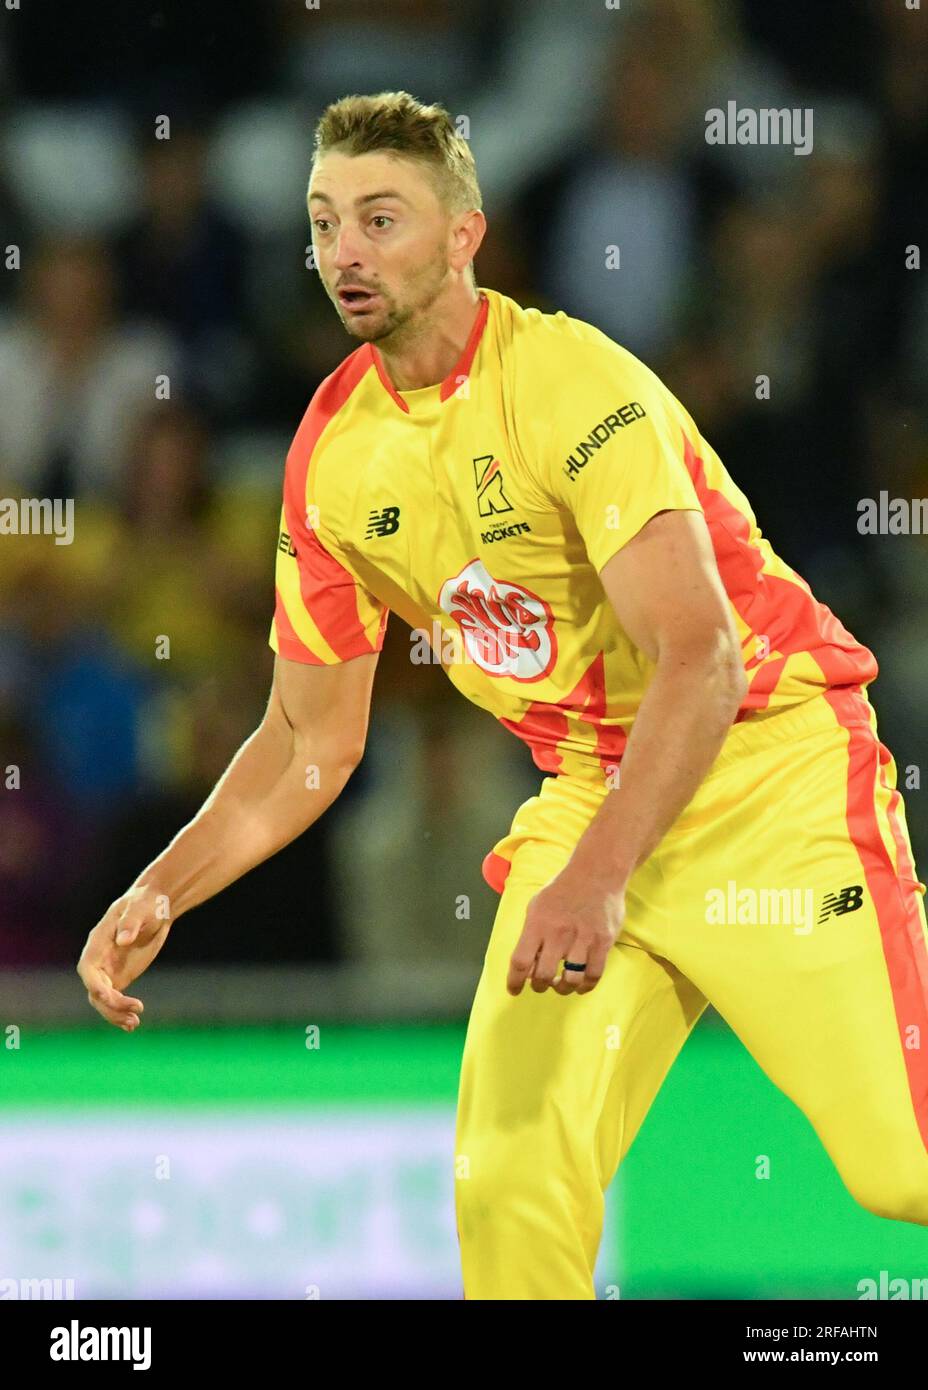 01 August 2023 - Trent Bridge Cricket Ground, Nottingham.  Event: The 100 Double Header (Mens and Women’s): Trent Rockets v Southern Brave.  Caption: Daniel Sams (Trent Rockets) bowls and seals a win for Trent Rockets.  Picture: Mark Dunn/Alamy Live News (Sports) Stock Photo